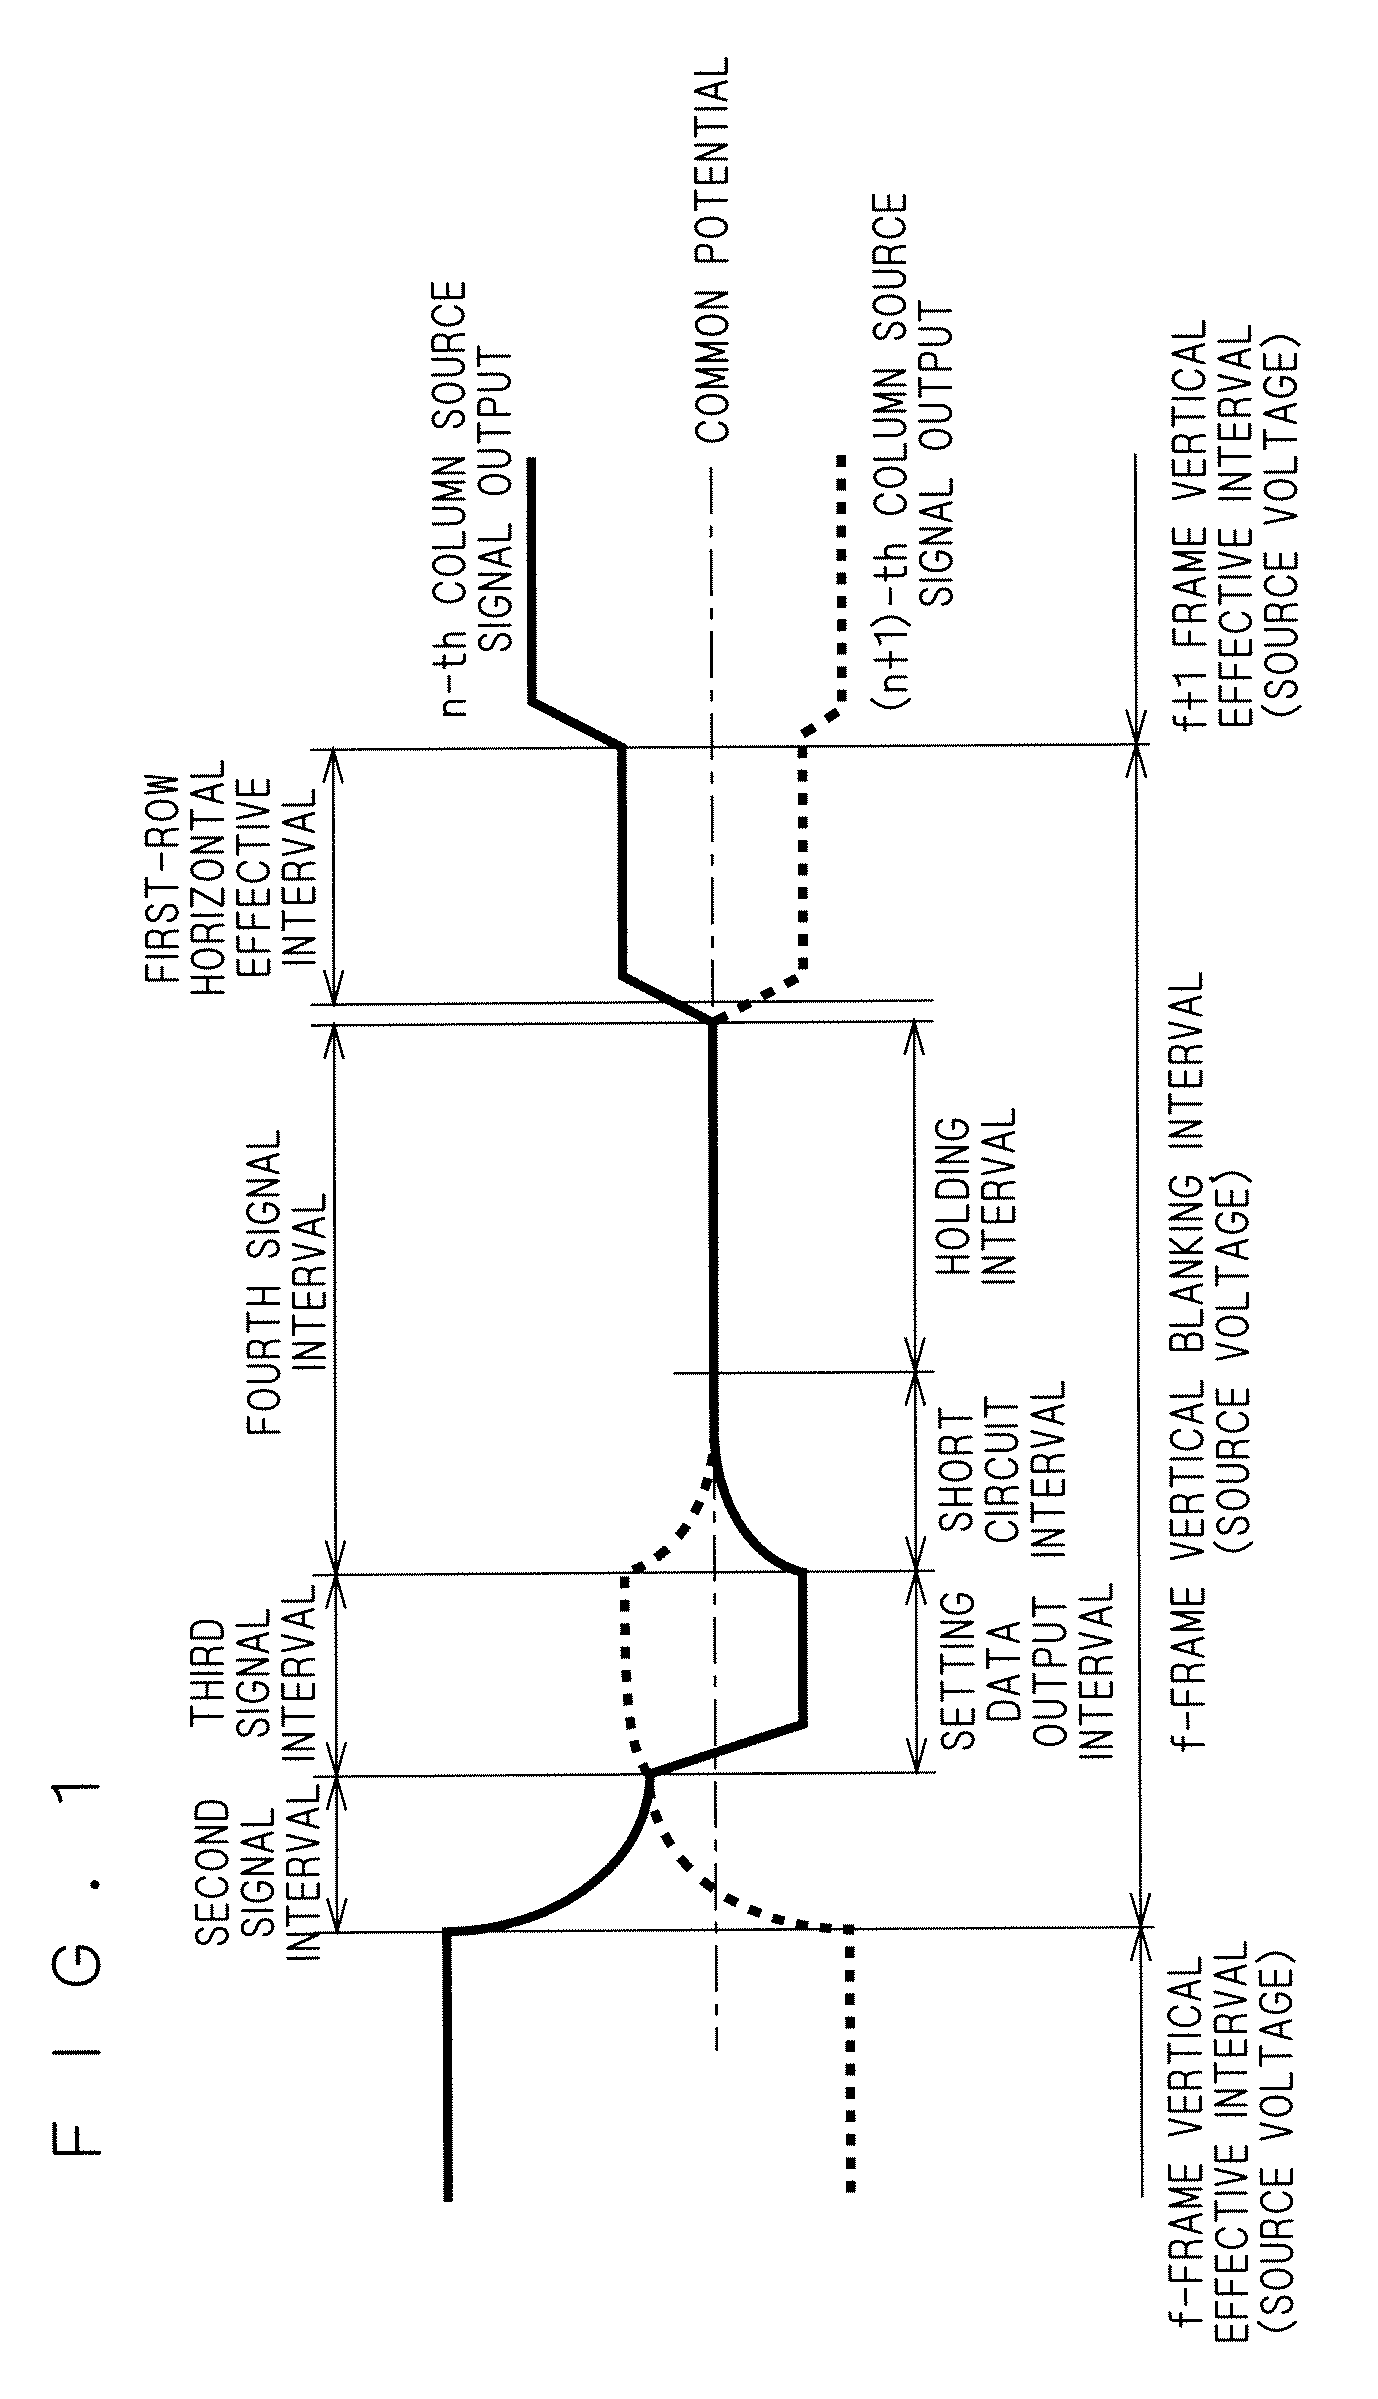 Liquid crystal display device and associated method for improving holding characteristics of an active element during a vertical blanking interval